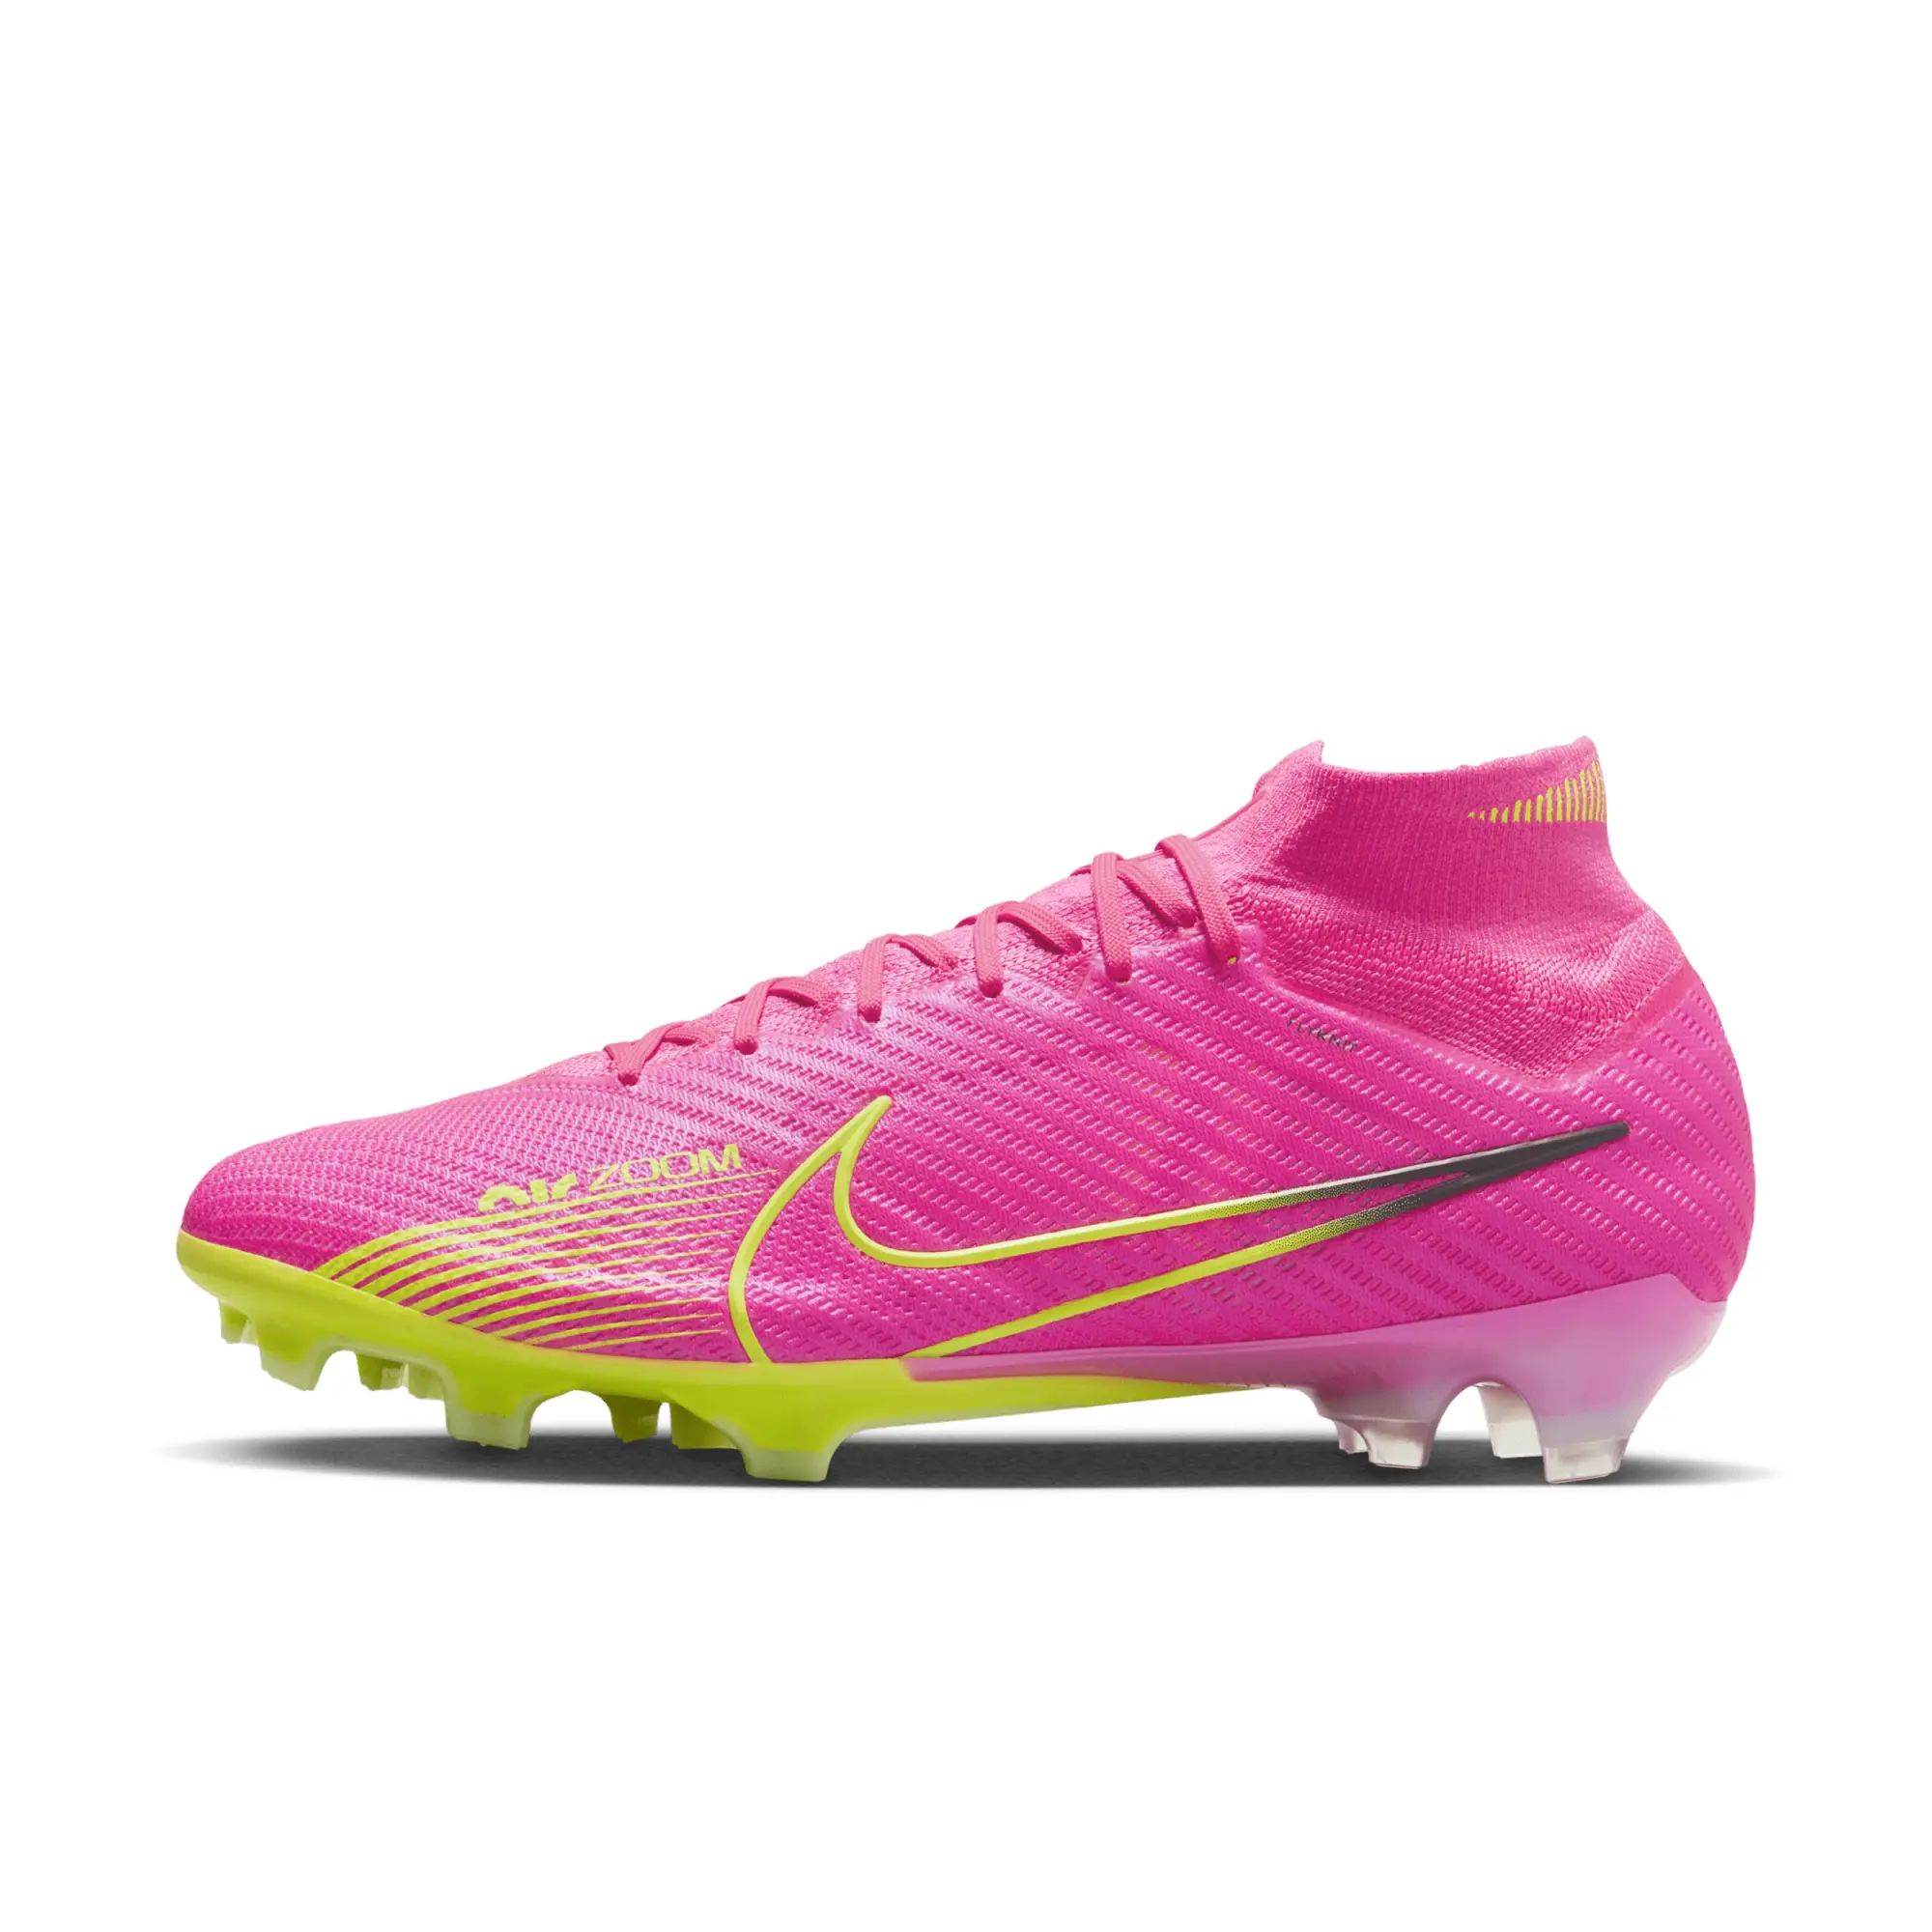 Nike Mercurial Superfly 9 Elite Firm-Ground Football Boot - Pink